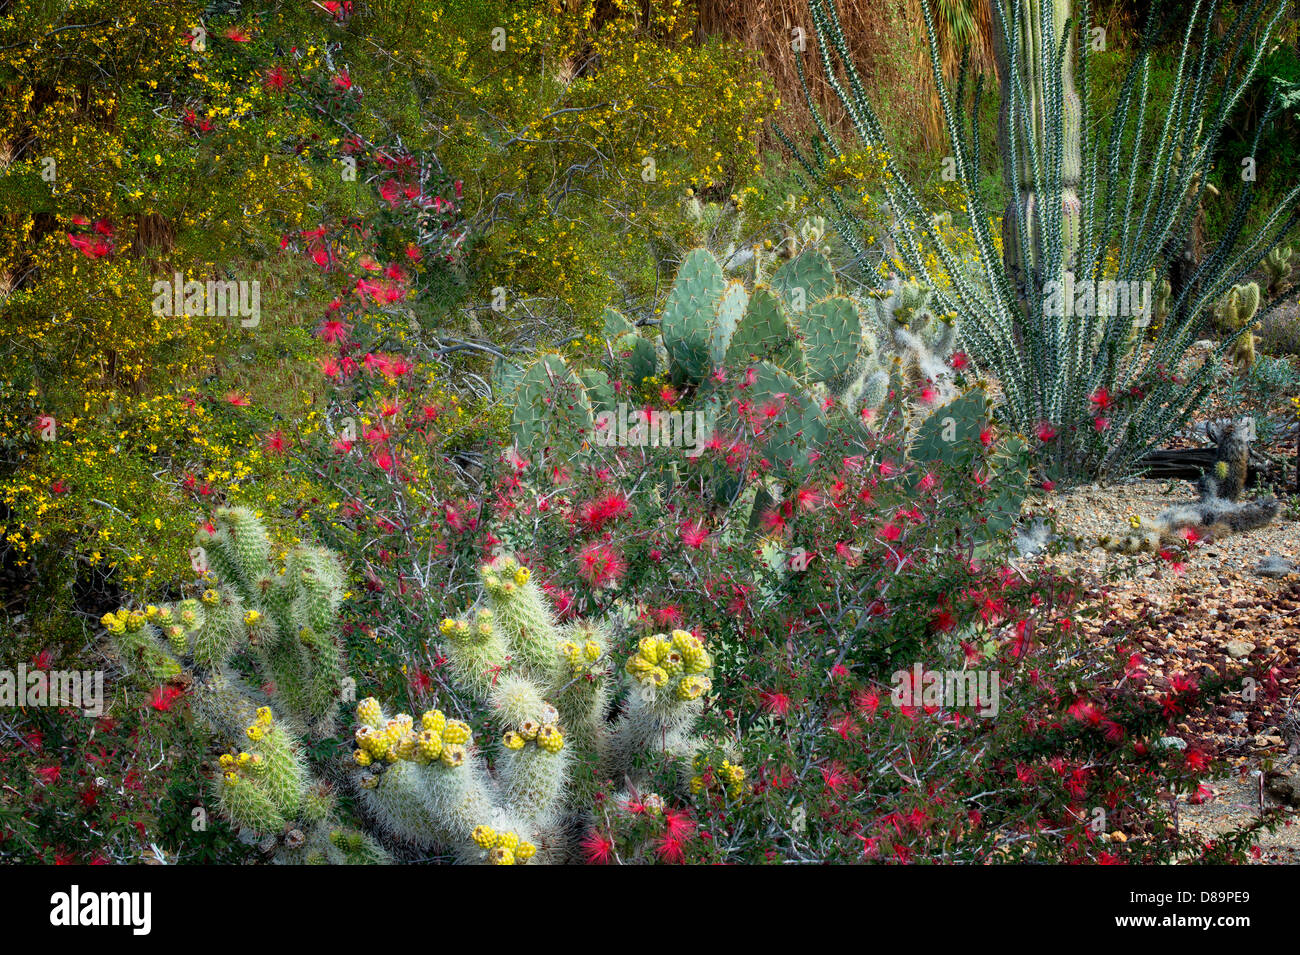 Cactus garden with cholla, prickly pear, ocotillo, and other flowers.,The Living Desert. Palm Desert, California Stock Photo